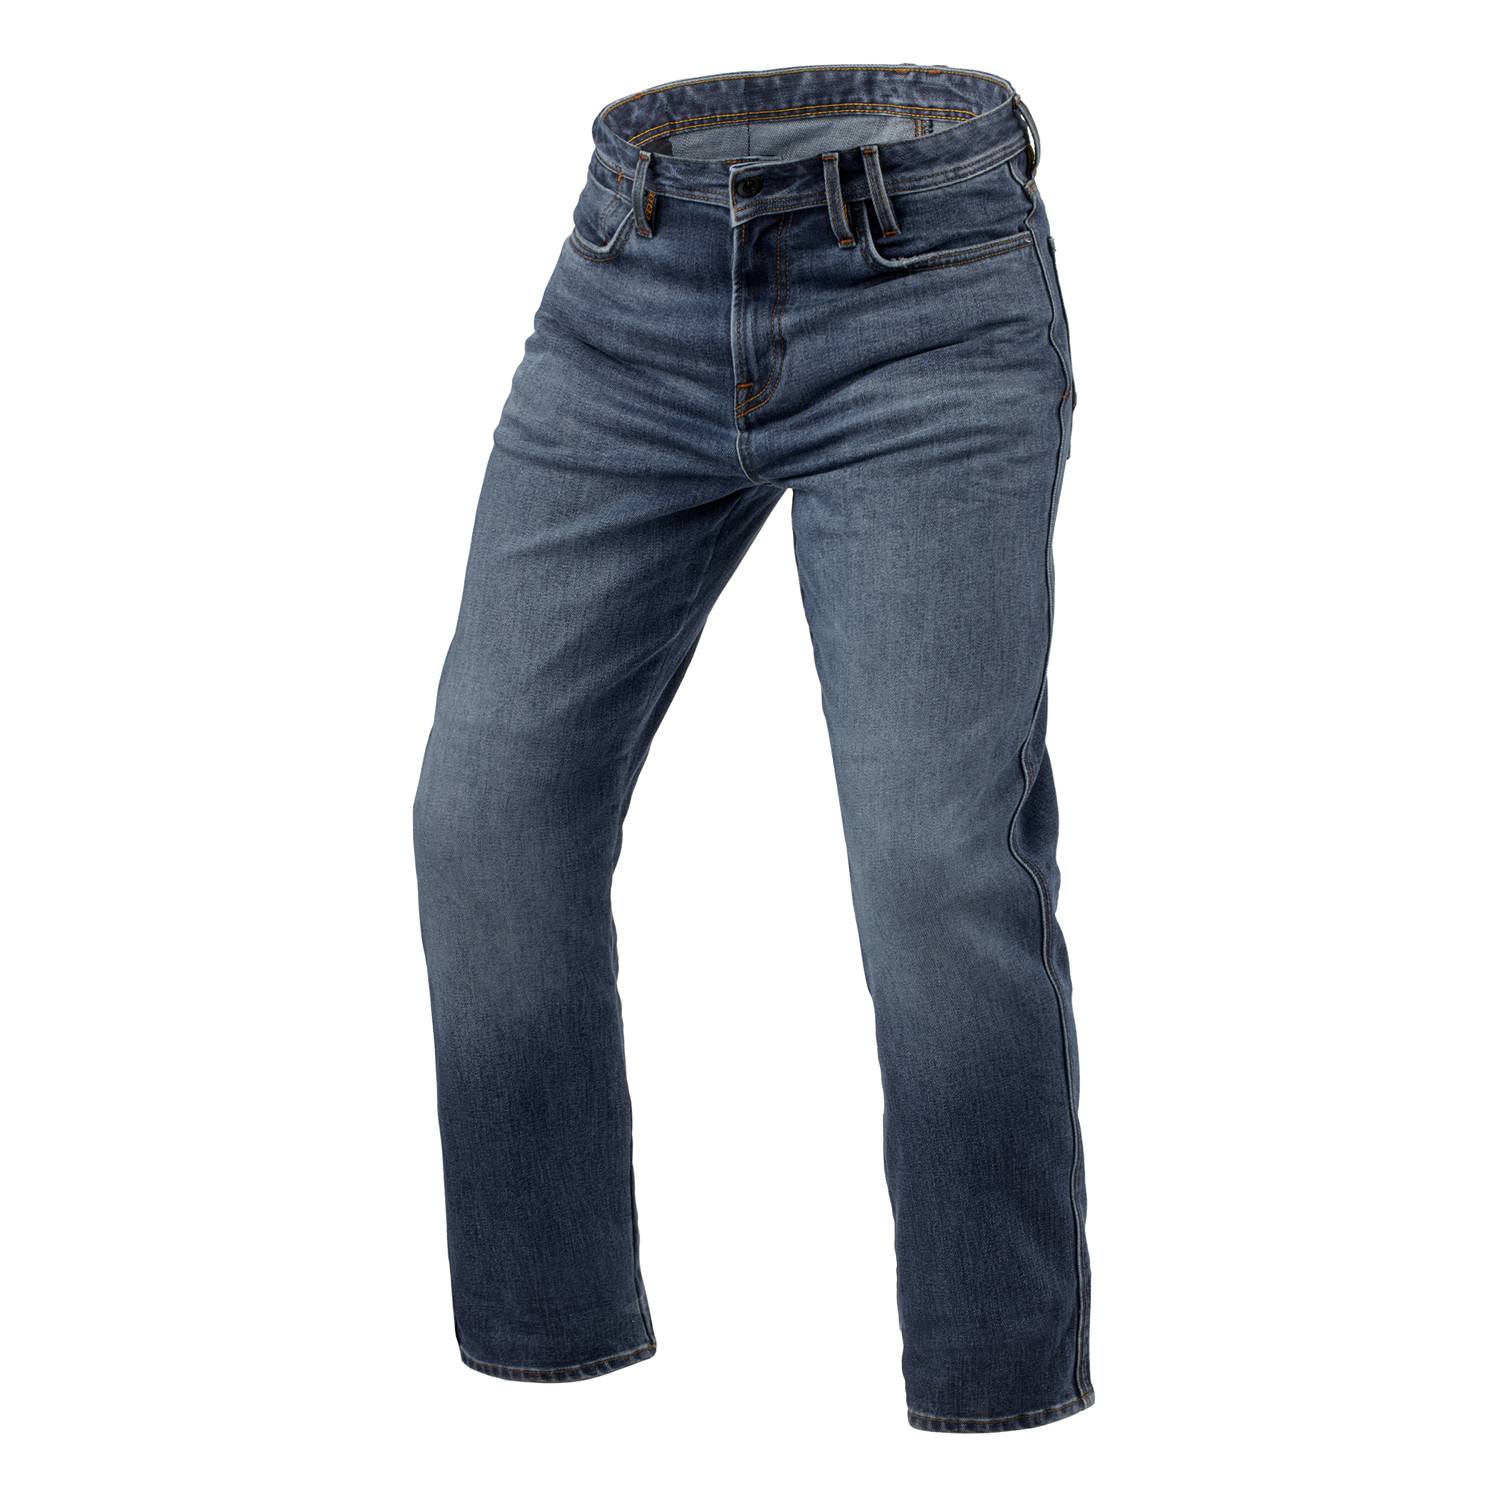 Image of REV'IT! Jeans Lombard 3 RF Mid Blue Stone L32 Motorcycle Jeans Size L32/W32 ID 8700001376044